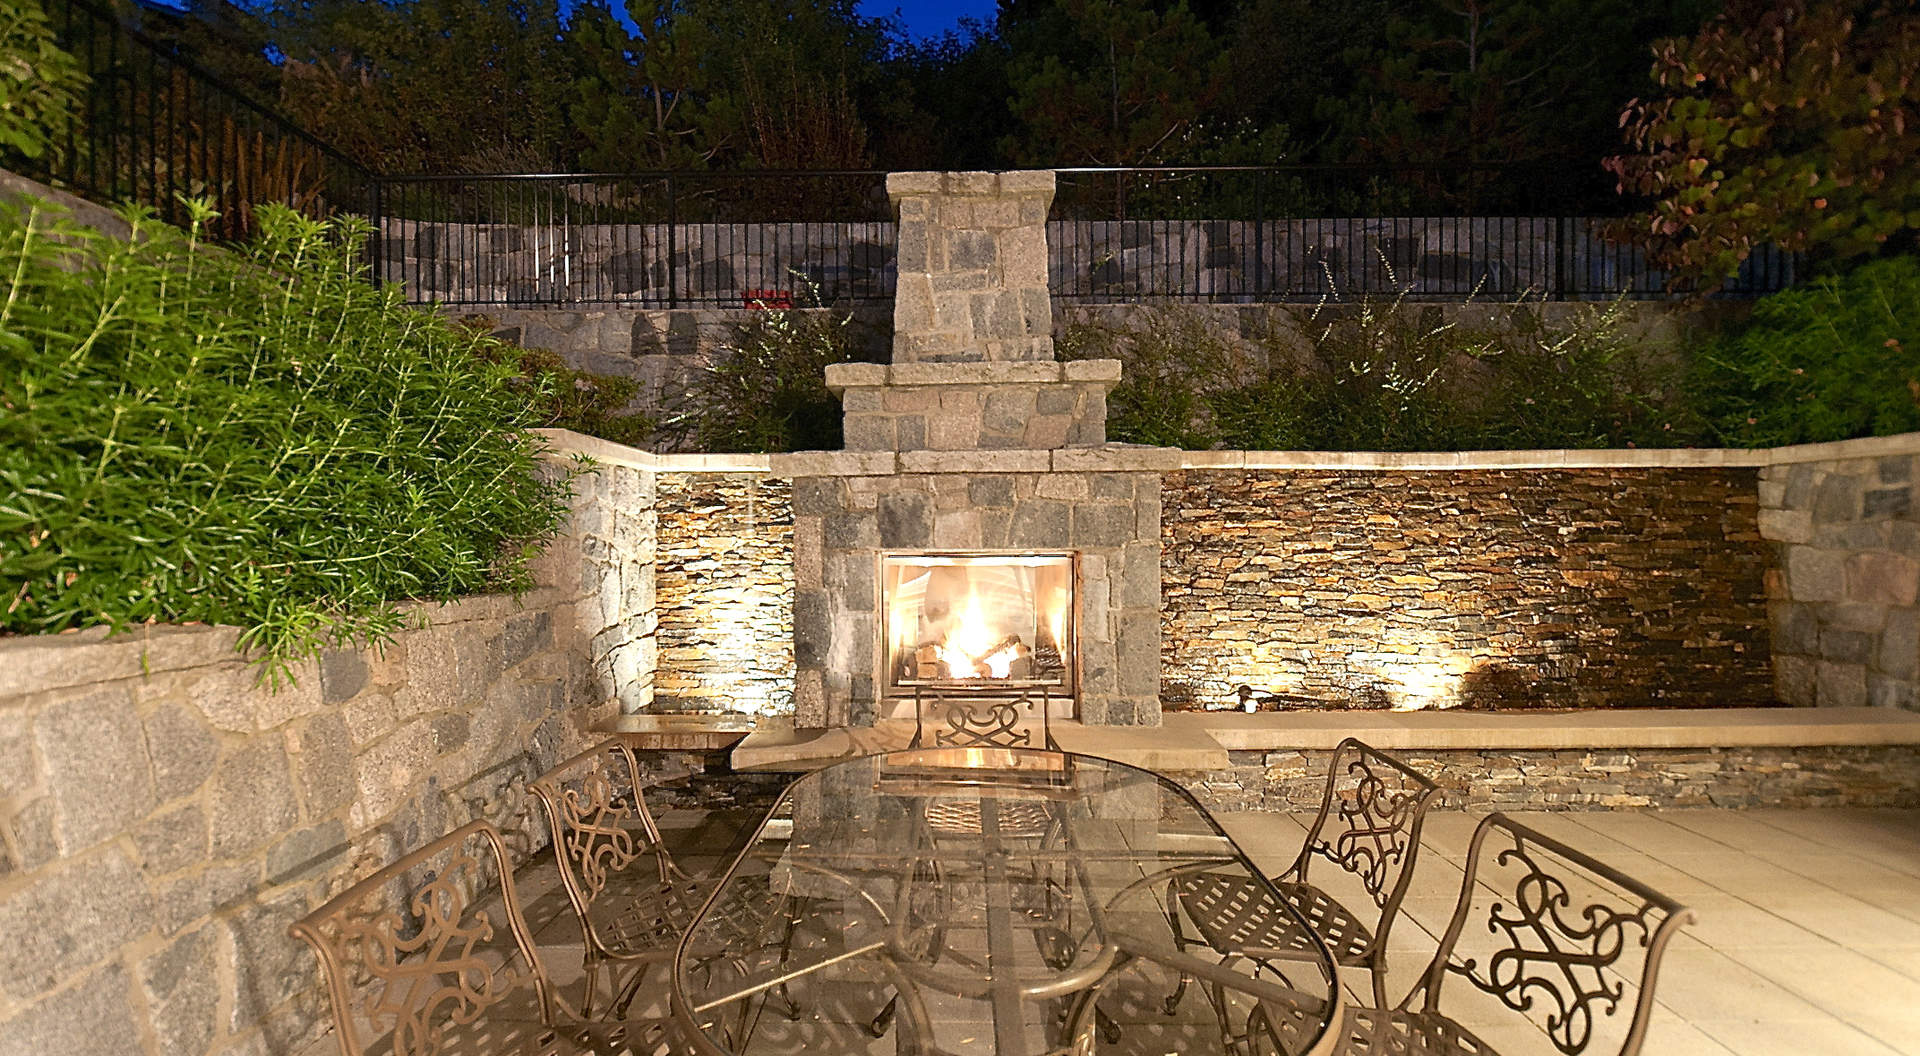 Sensational Outdoor Entertainment Area with Fireplace